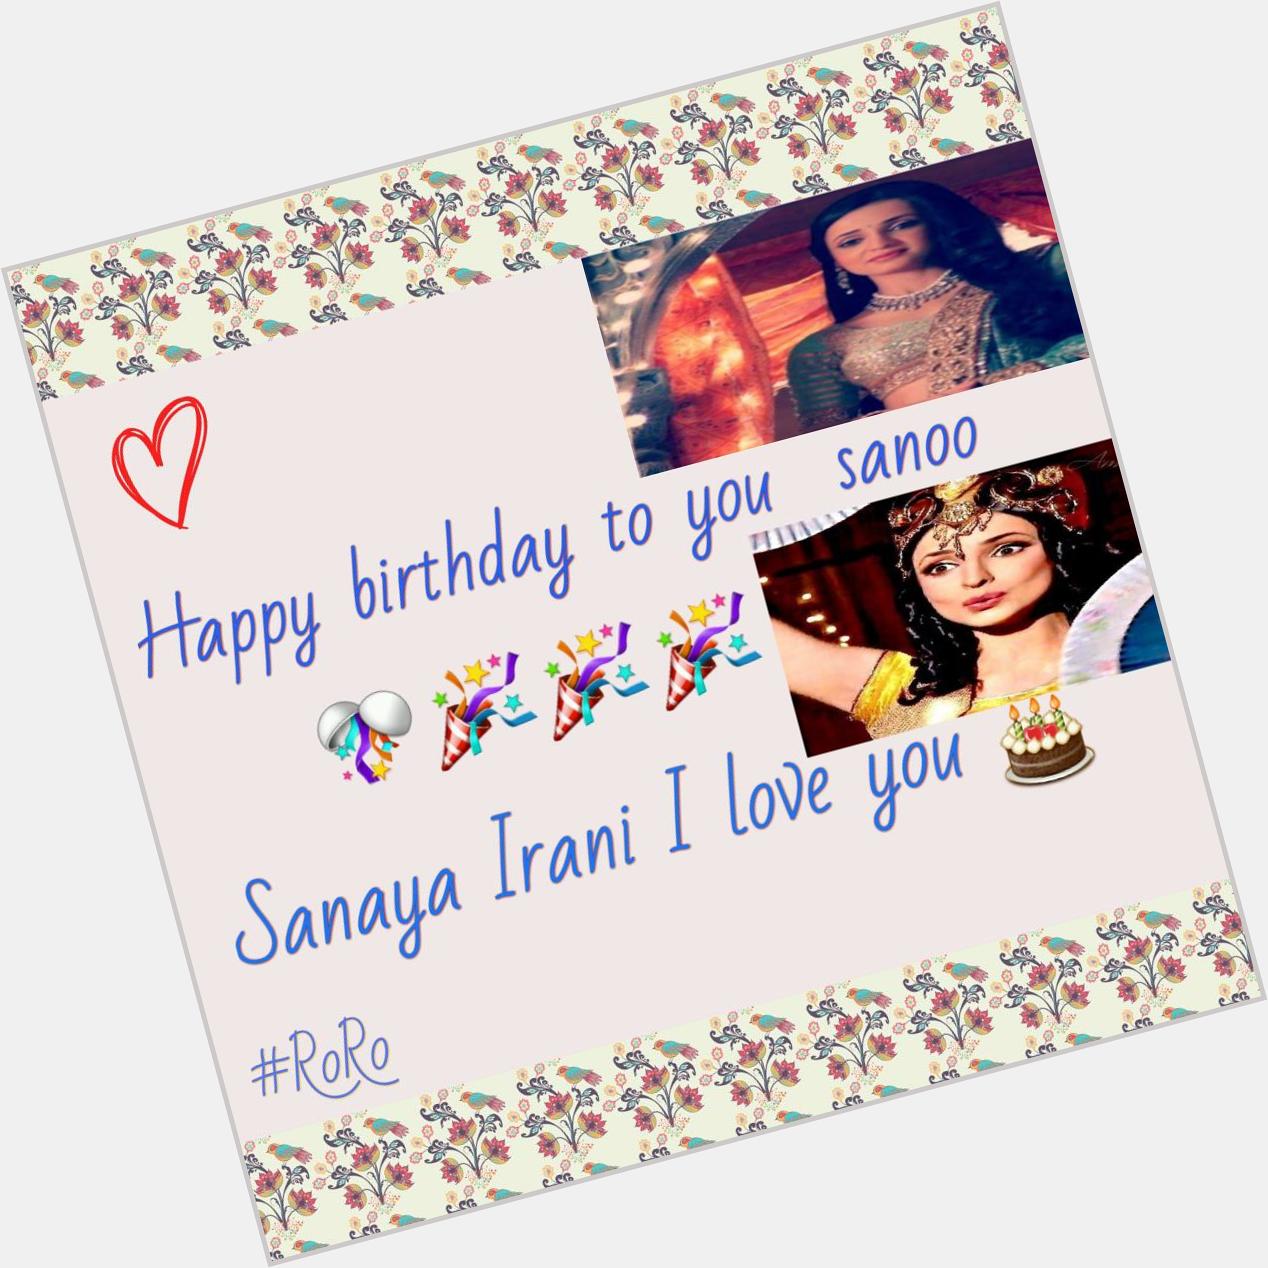  sanaya irani happy birthday wish you all the best and hapiness in this world .    love you 